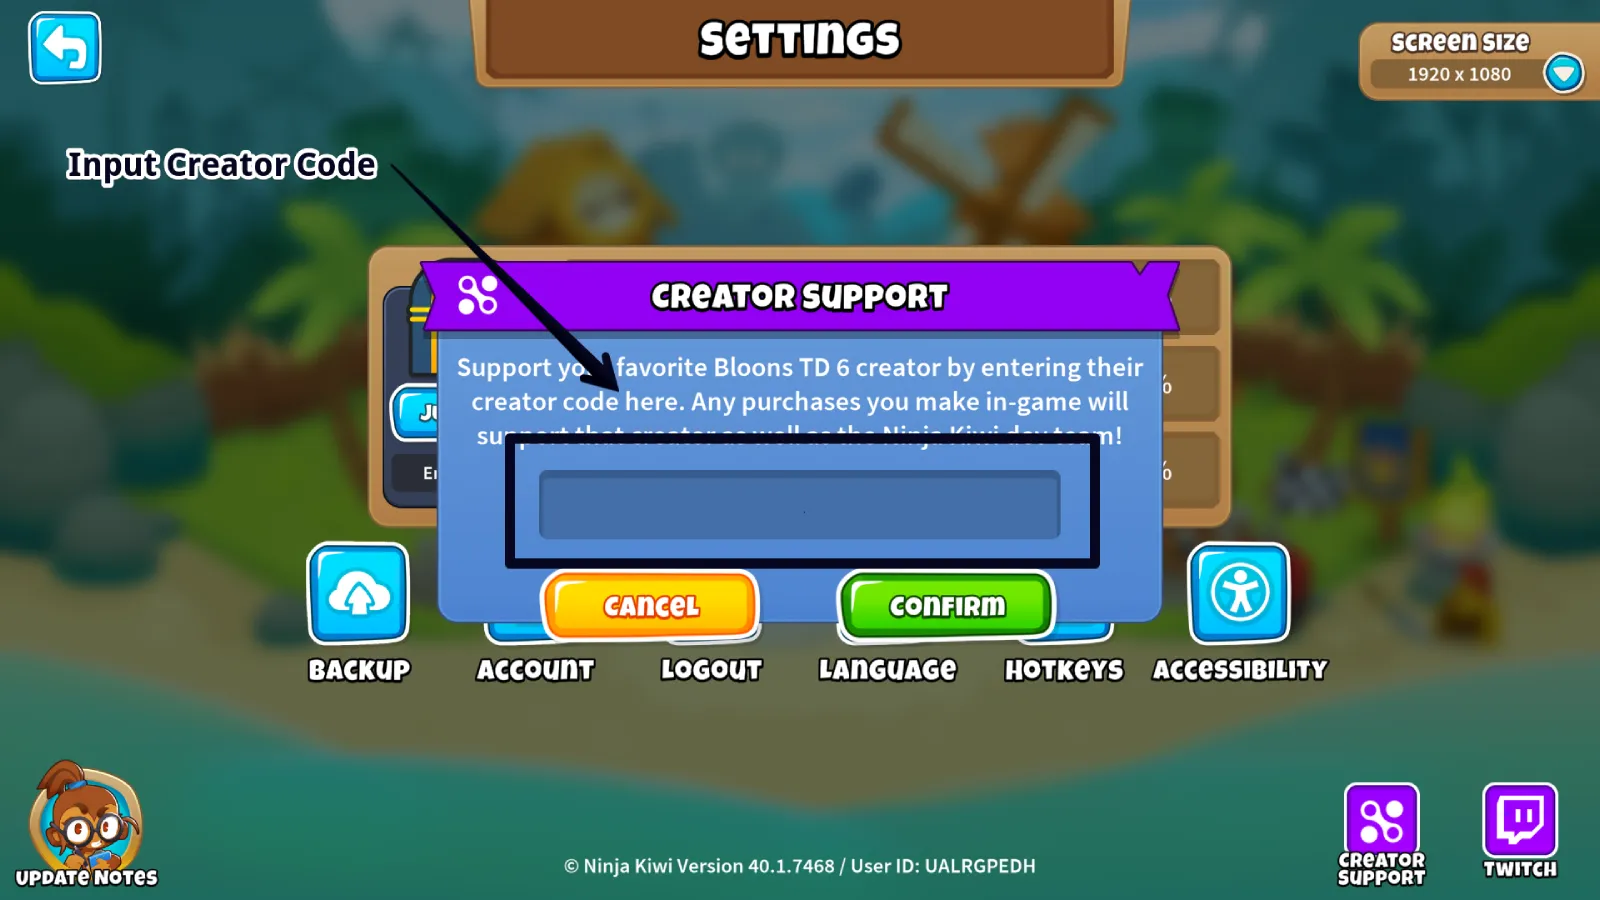 How to Use Creator Codes in Bloons TD 6 - Part 3 Desktop